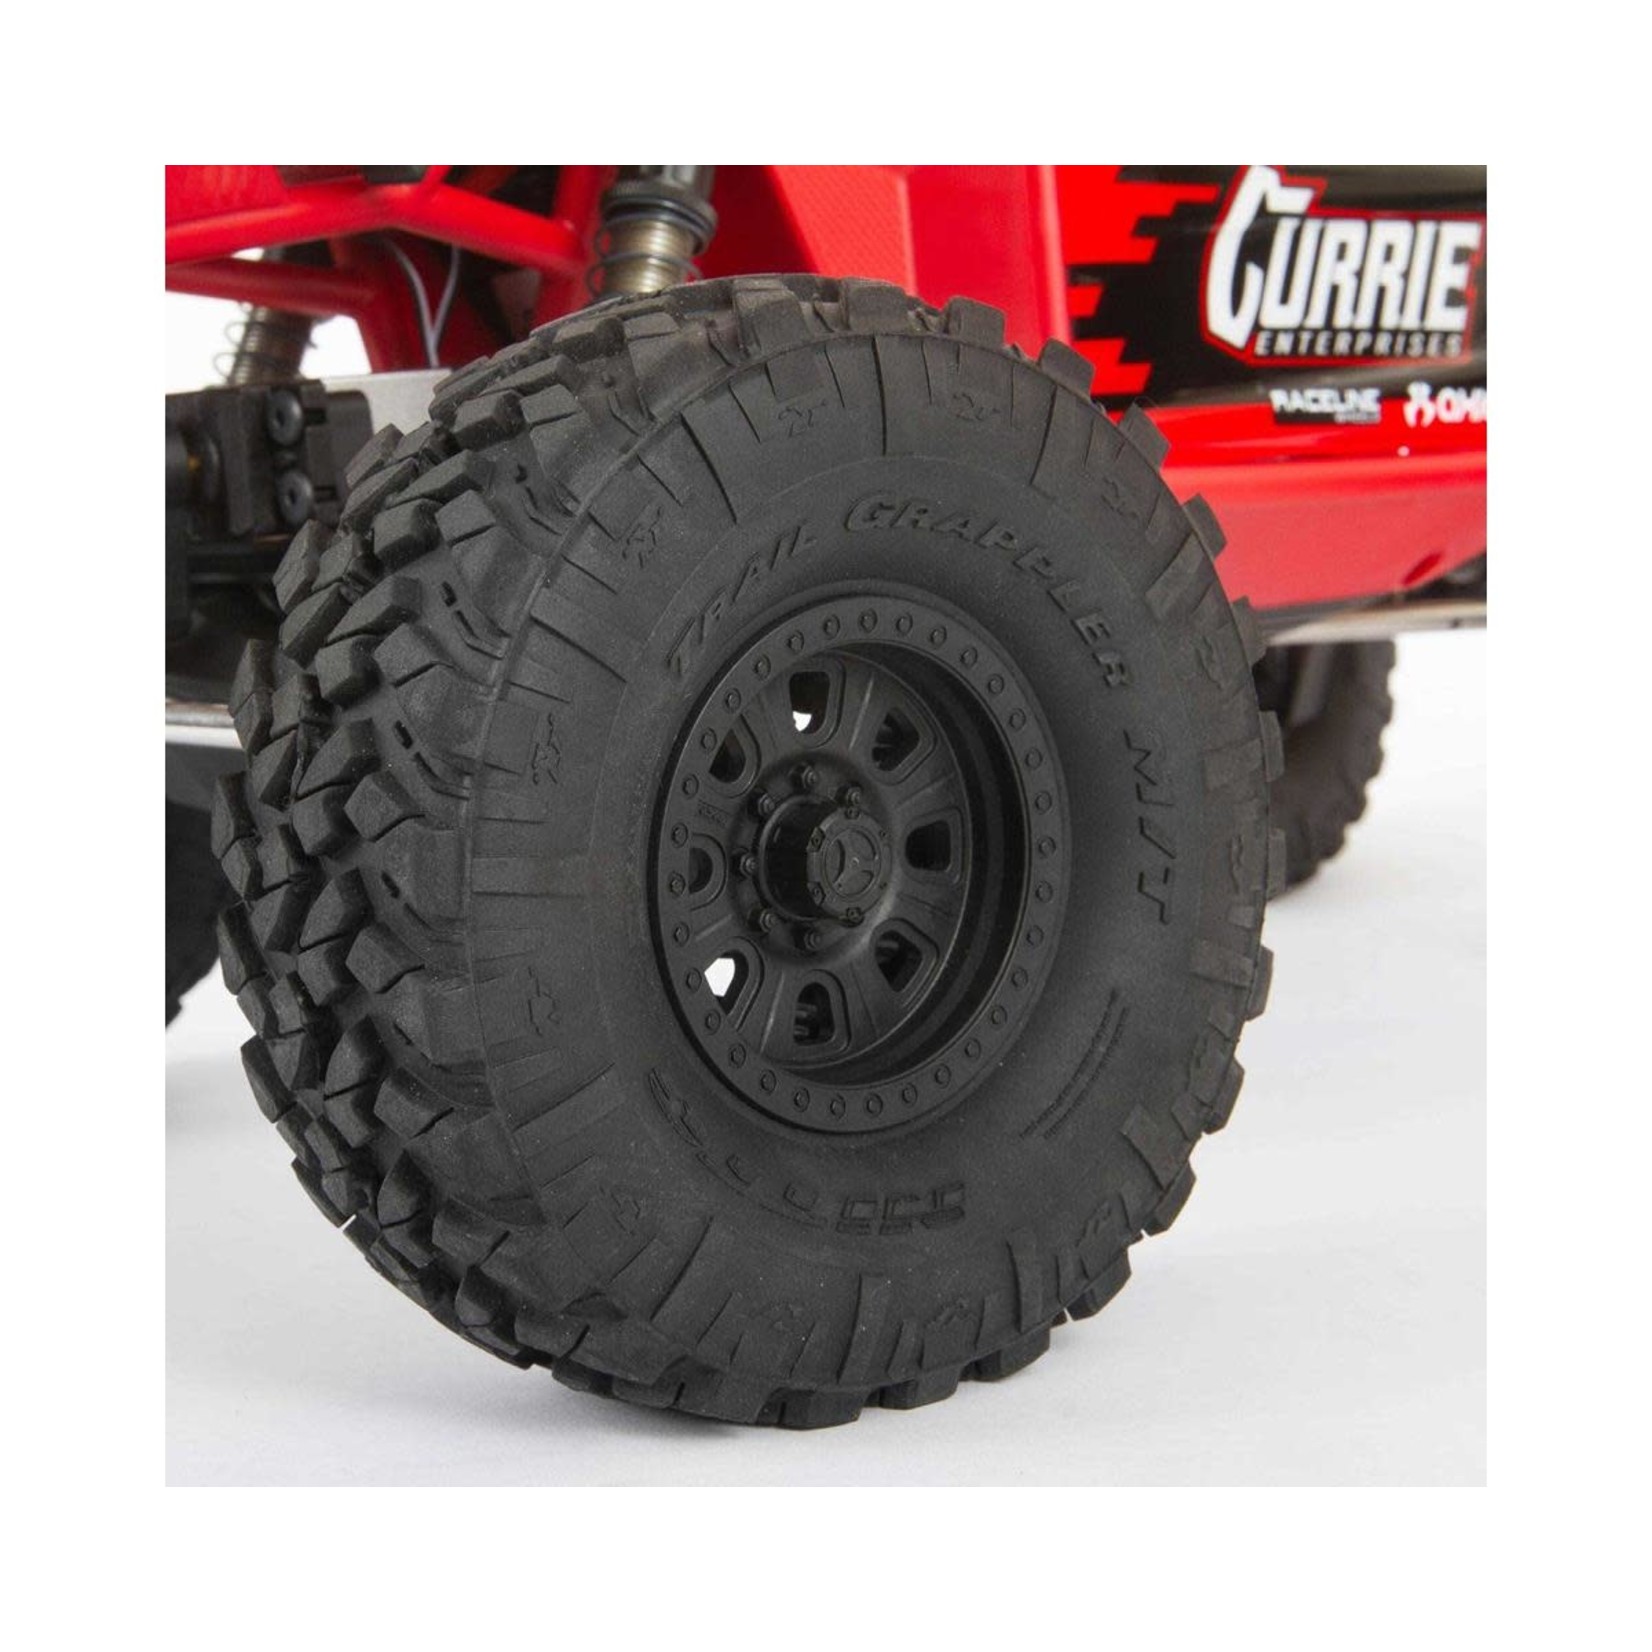 Axial Axial Capra 1.9 4WS Unlimited Trail Buggy 1/10 RTR 4WD Rock Crawler (Red) w/DX3 2.4GHz Radio #AXI03022BT1